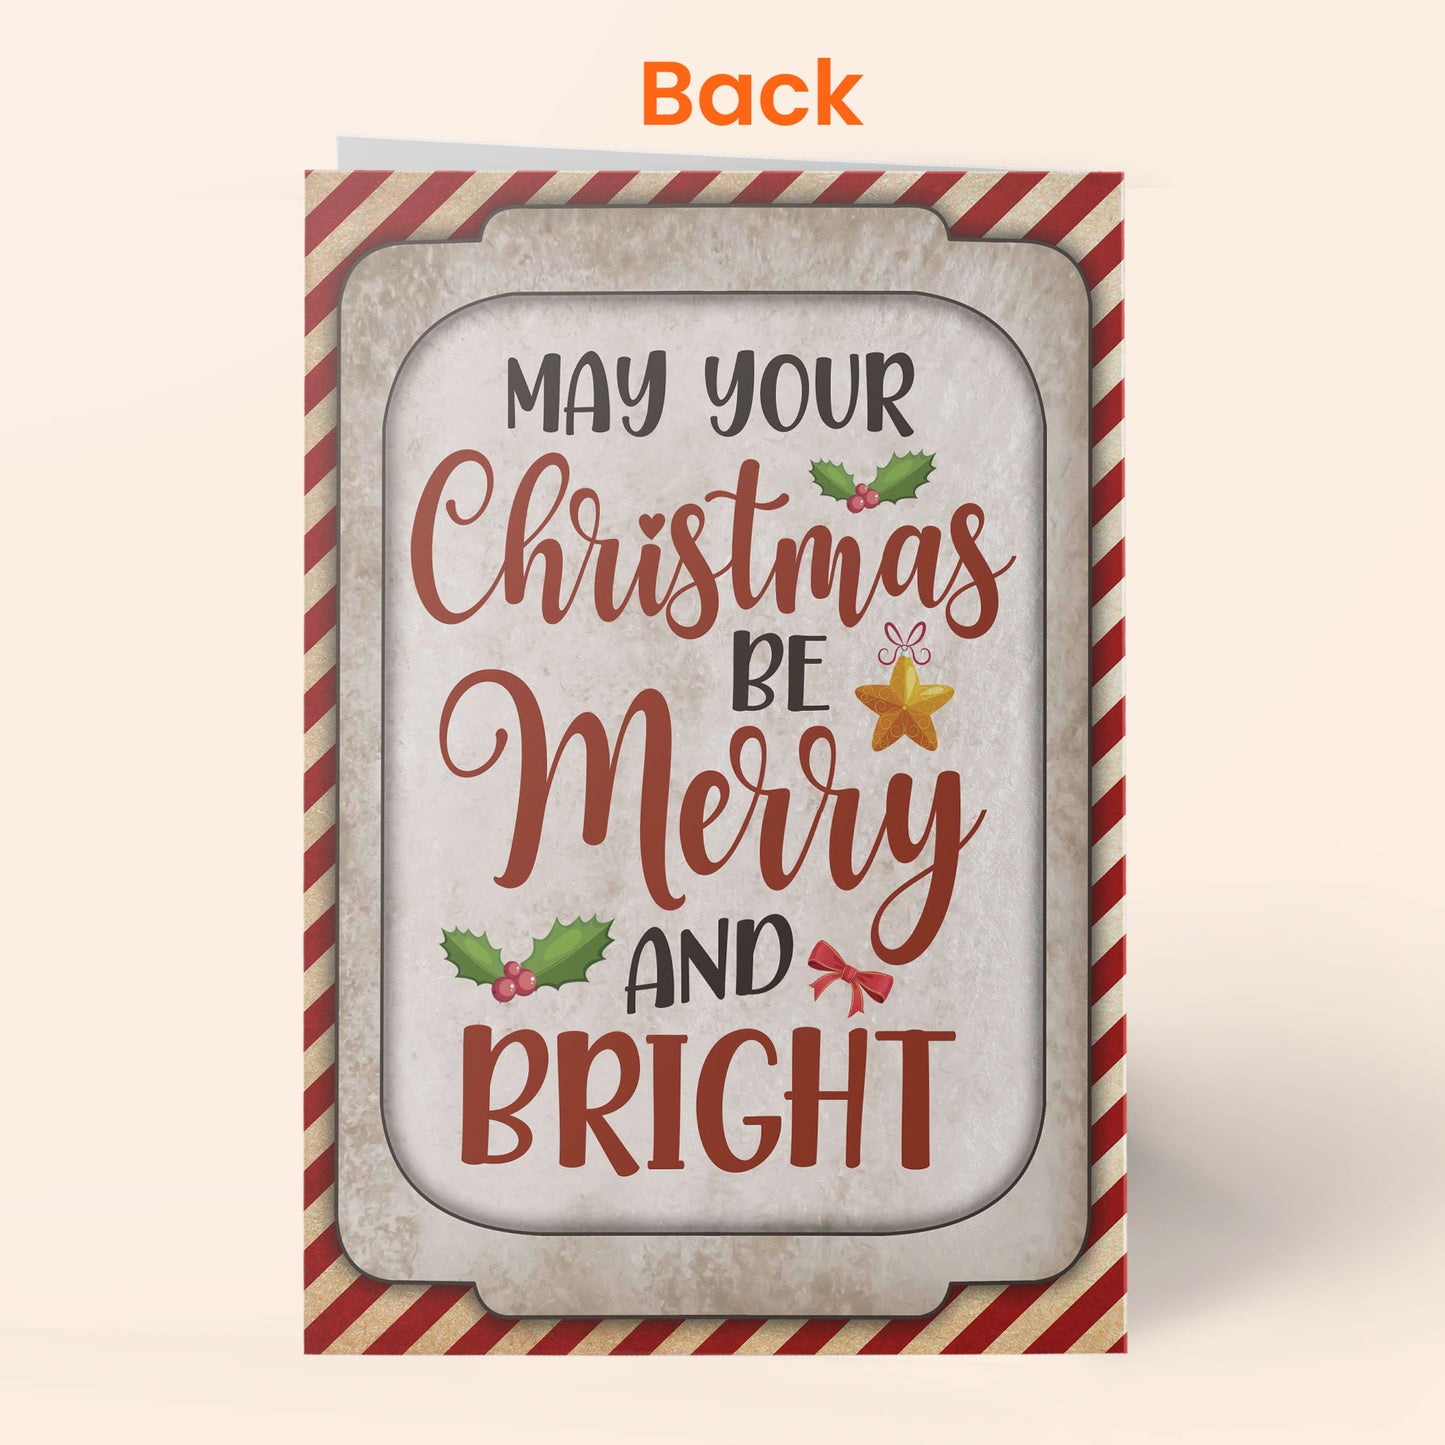 May Your Christmas Be Merry And Bright - Personalized Folded Card - Christmas Gift For Family Members, Friends, Neighbors